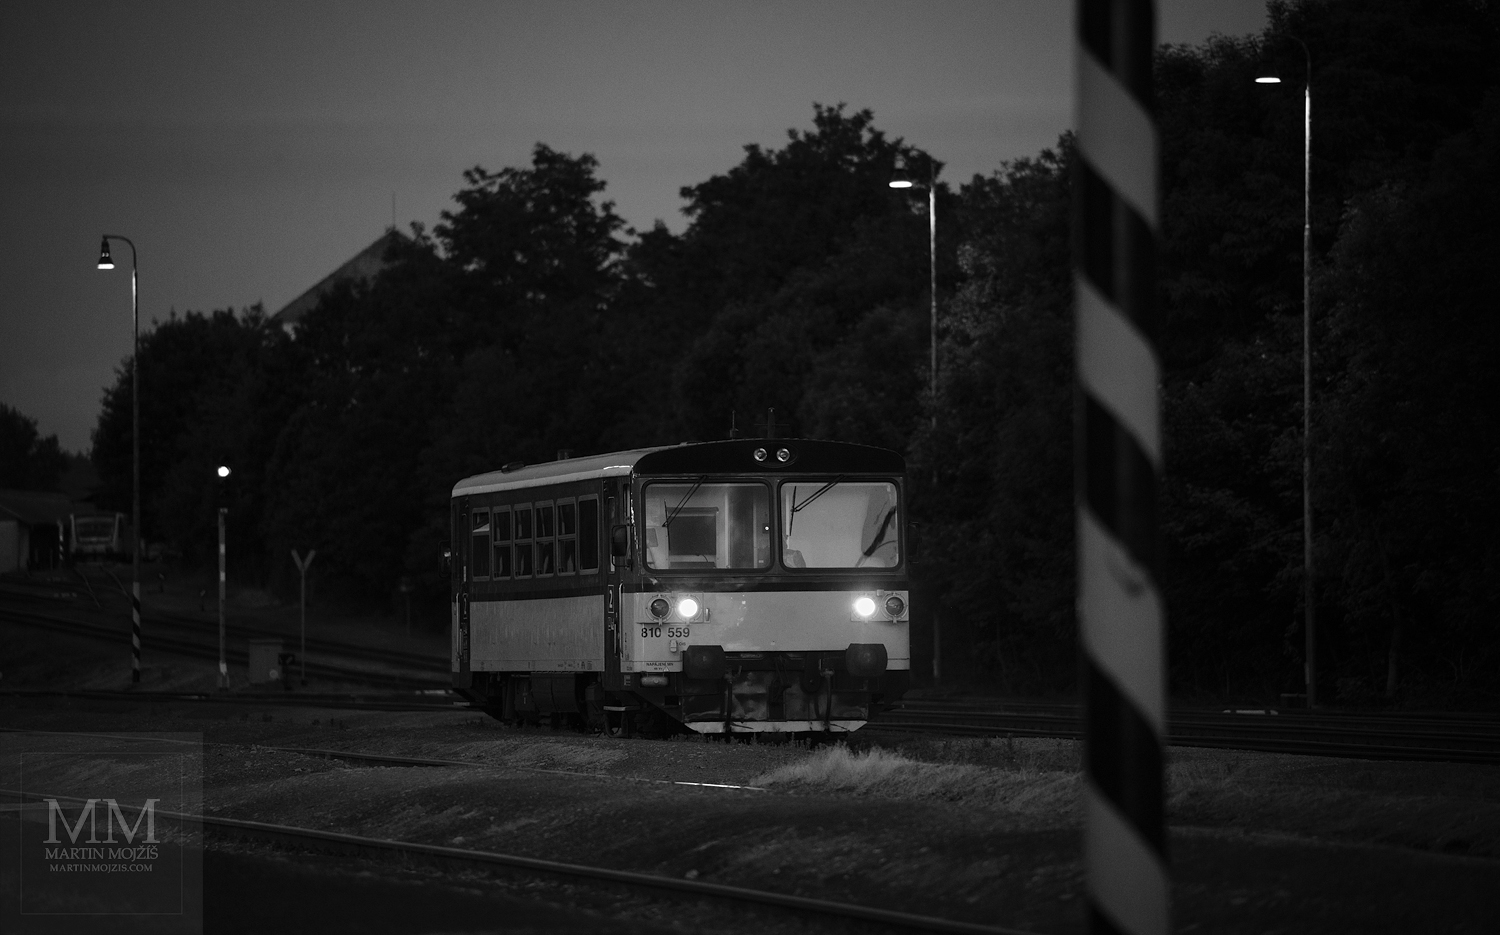 A tiny engine train and a evening railway station. Fine art black and white photograph EVENING TINY ENGINE TRAIN I., photographed by Martin Mojzis.